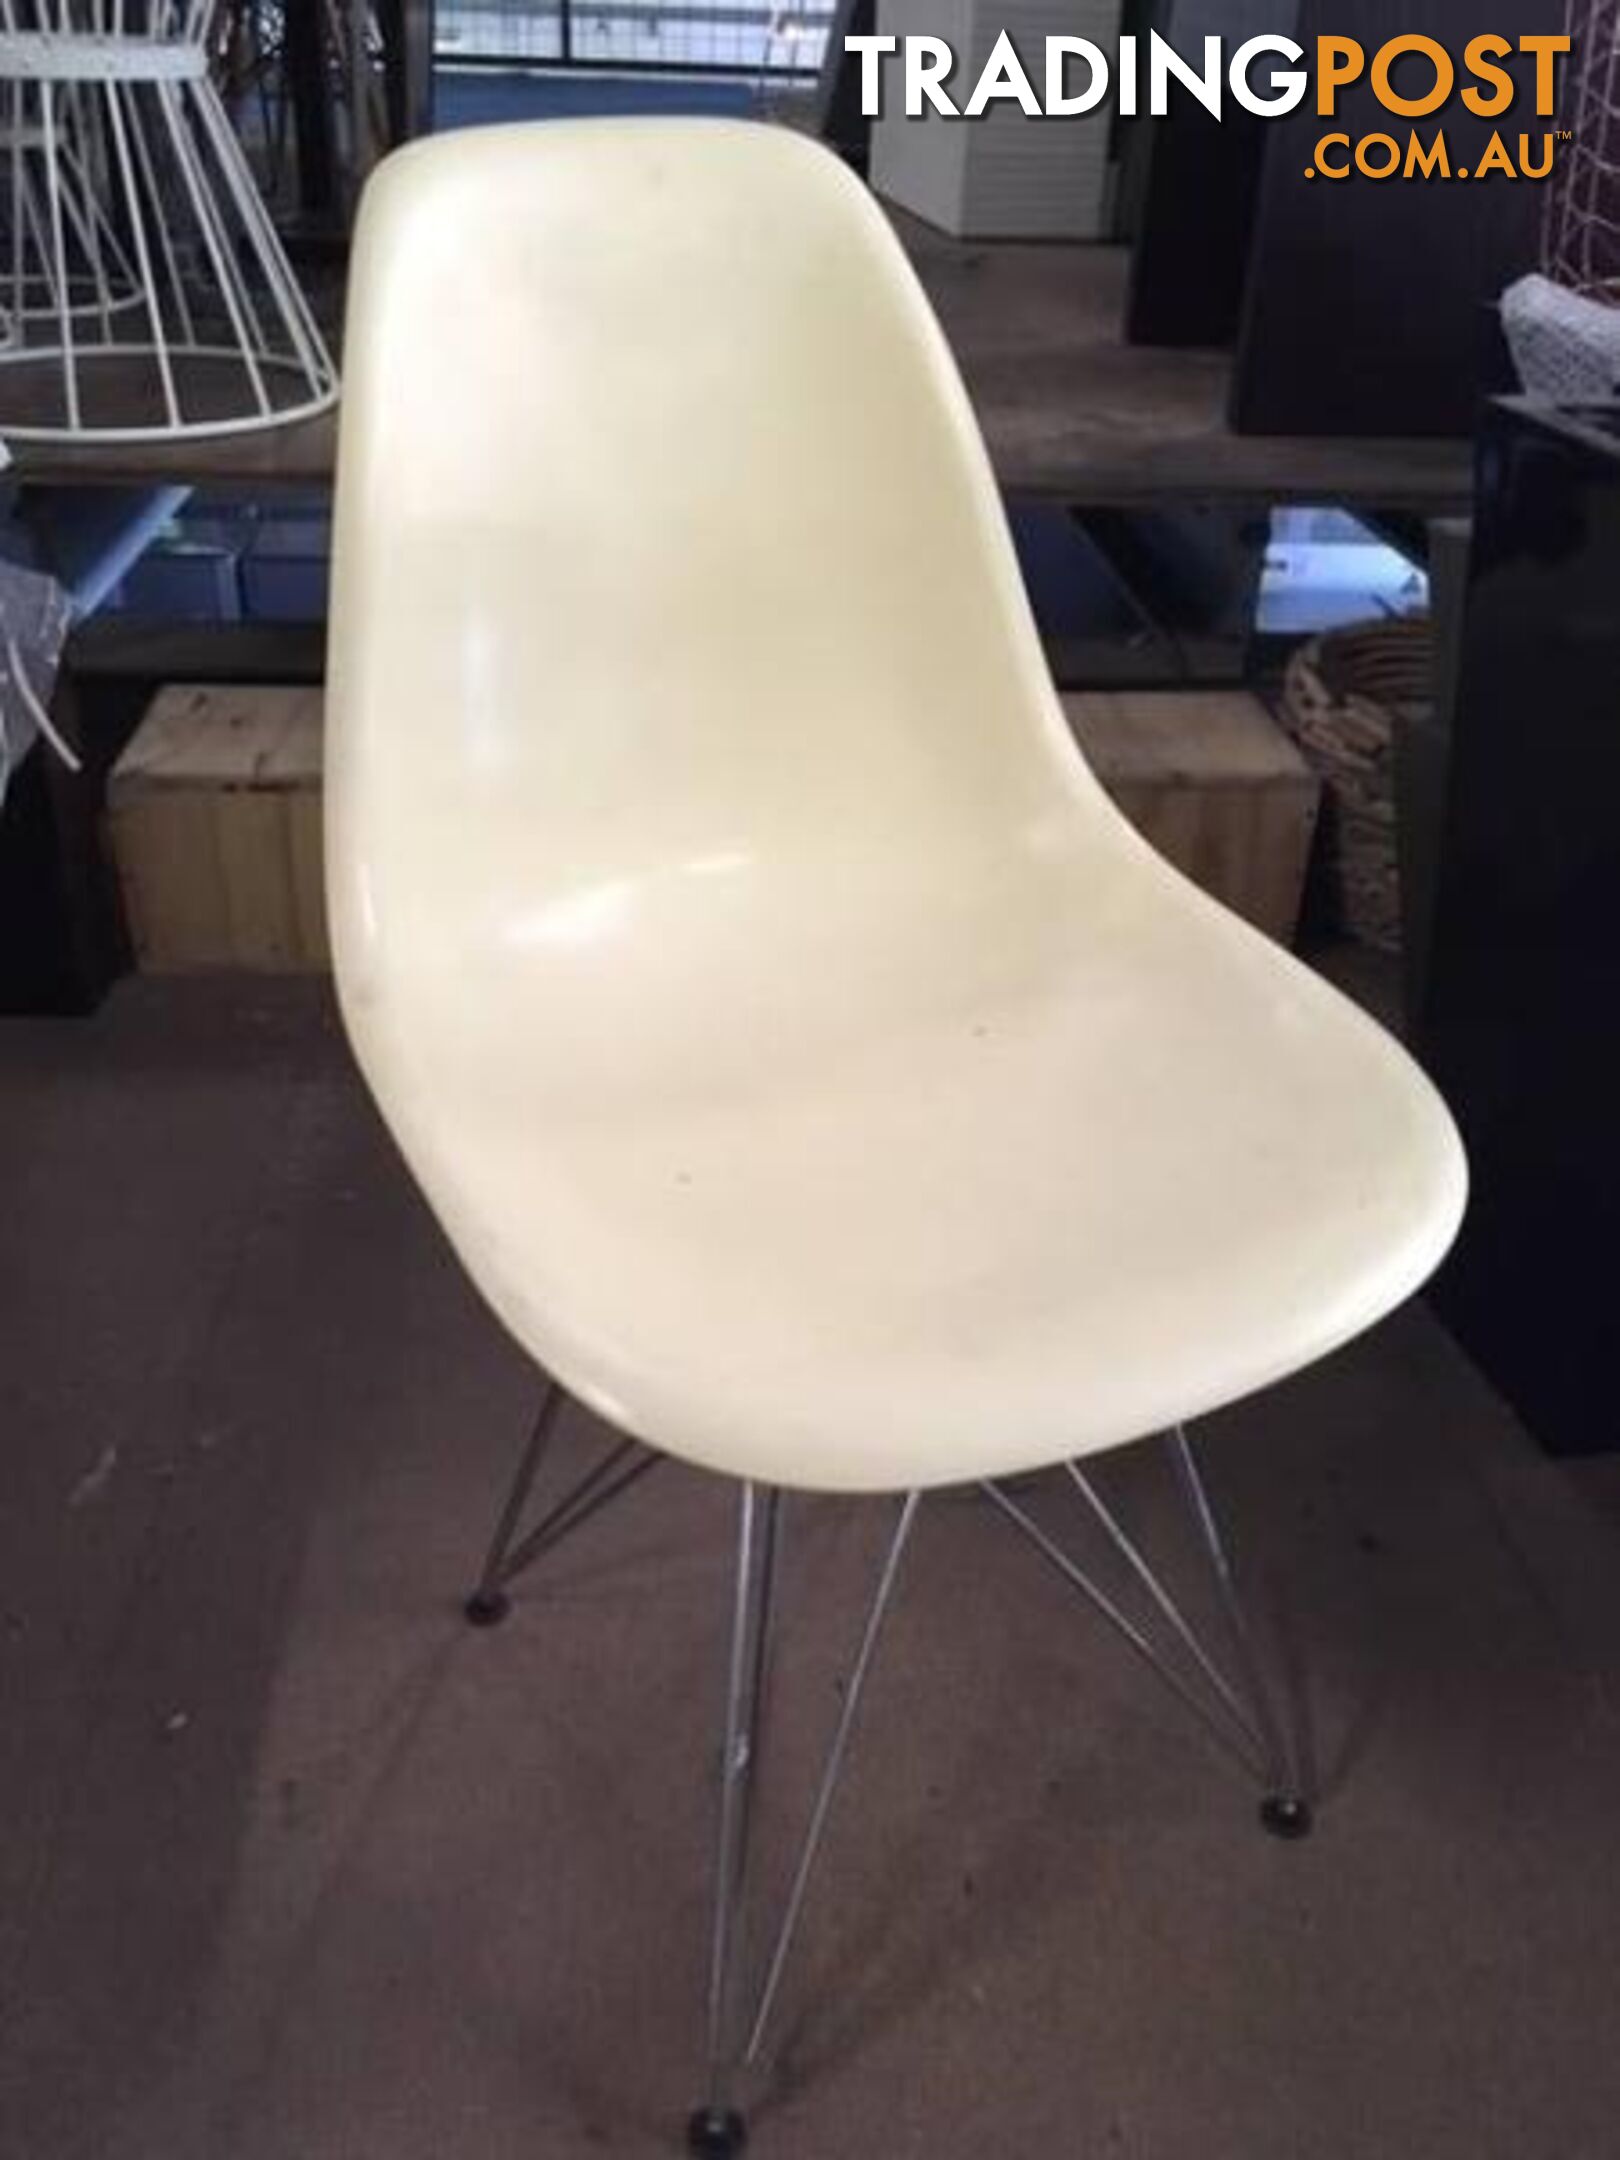 Replicia Charles Eames DSR Eiffel Dining Chair with Chrome Legs